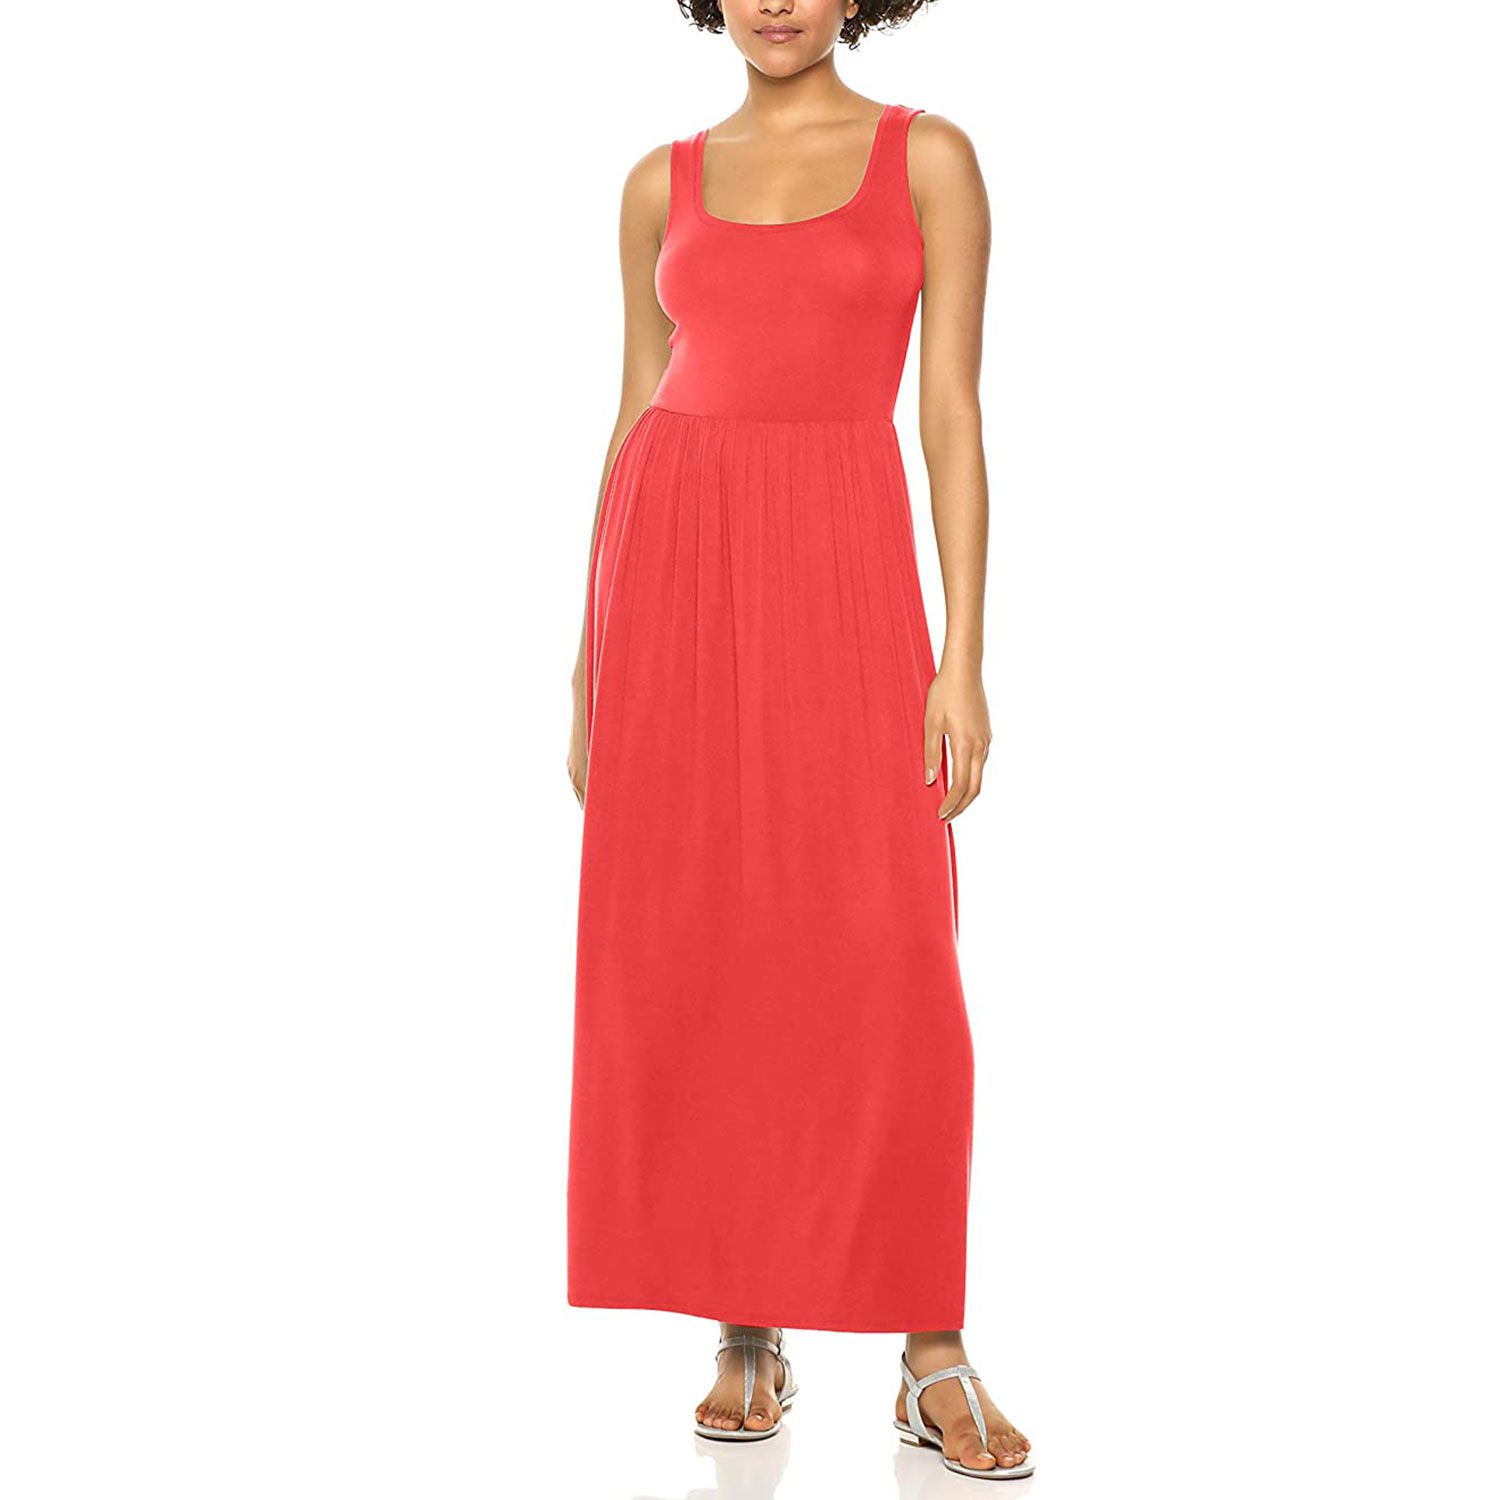 The Amazon Essentials Tank Waisted Maxi Dress Is Popular | PEOPLE.com